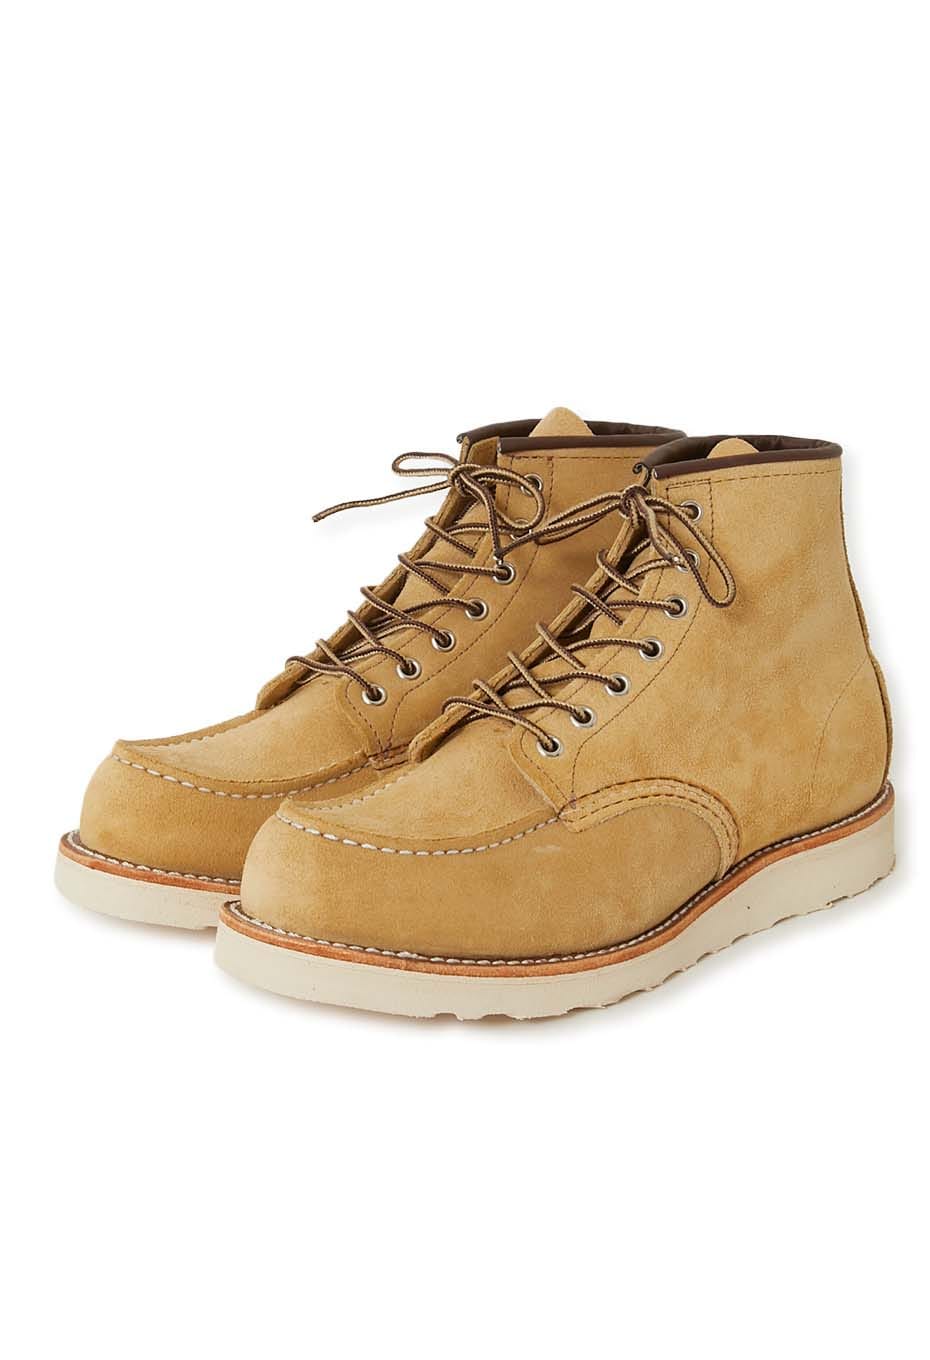 RED WING #8833D 6" Classic Mock